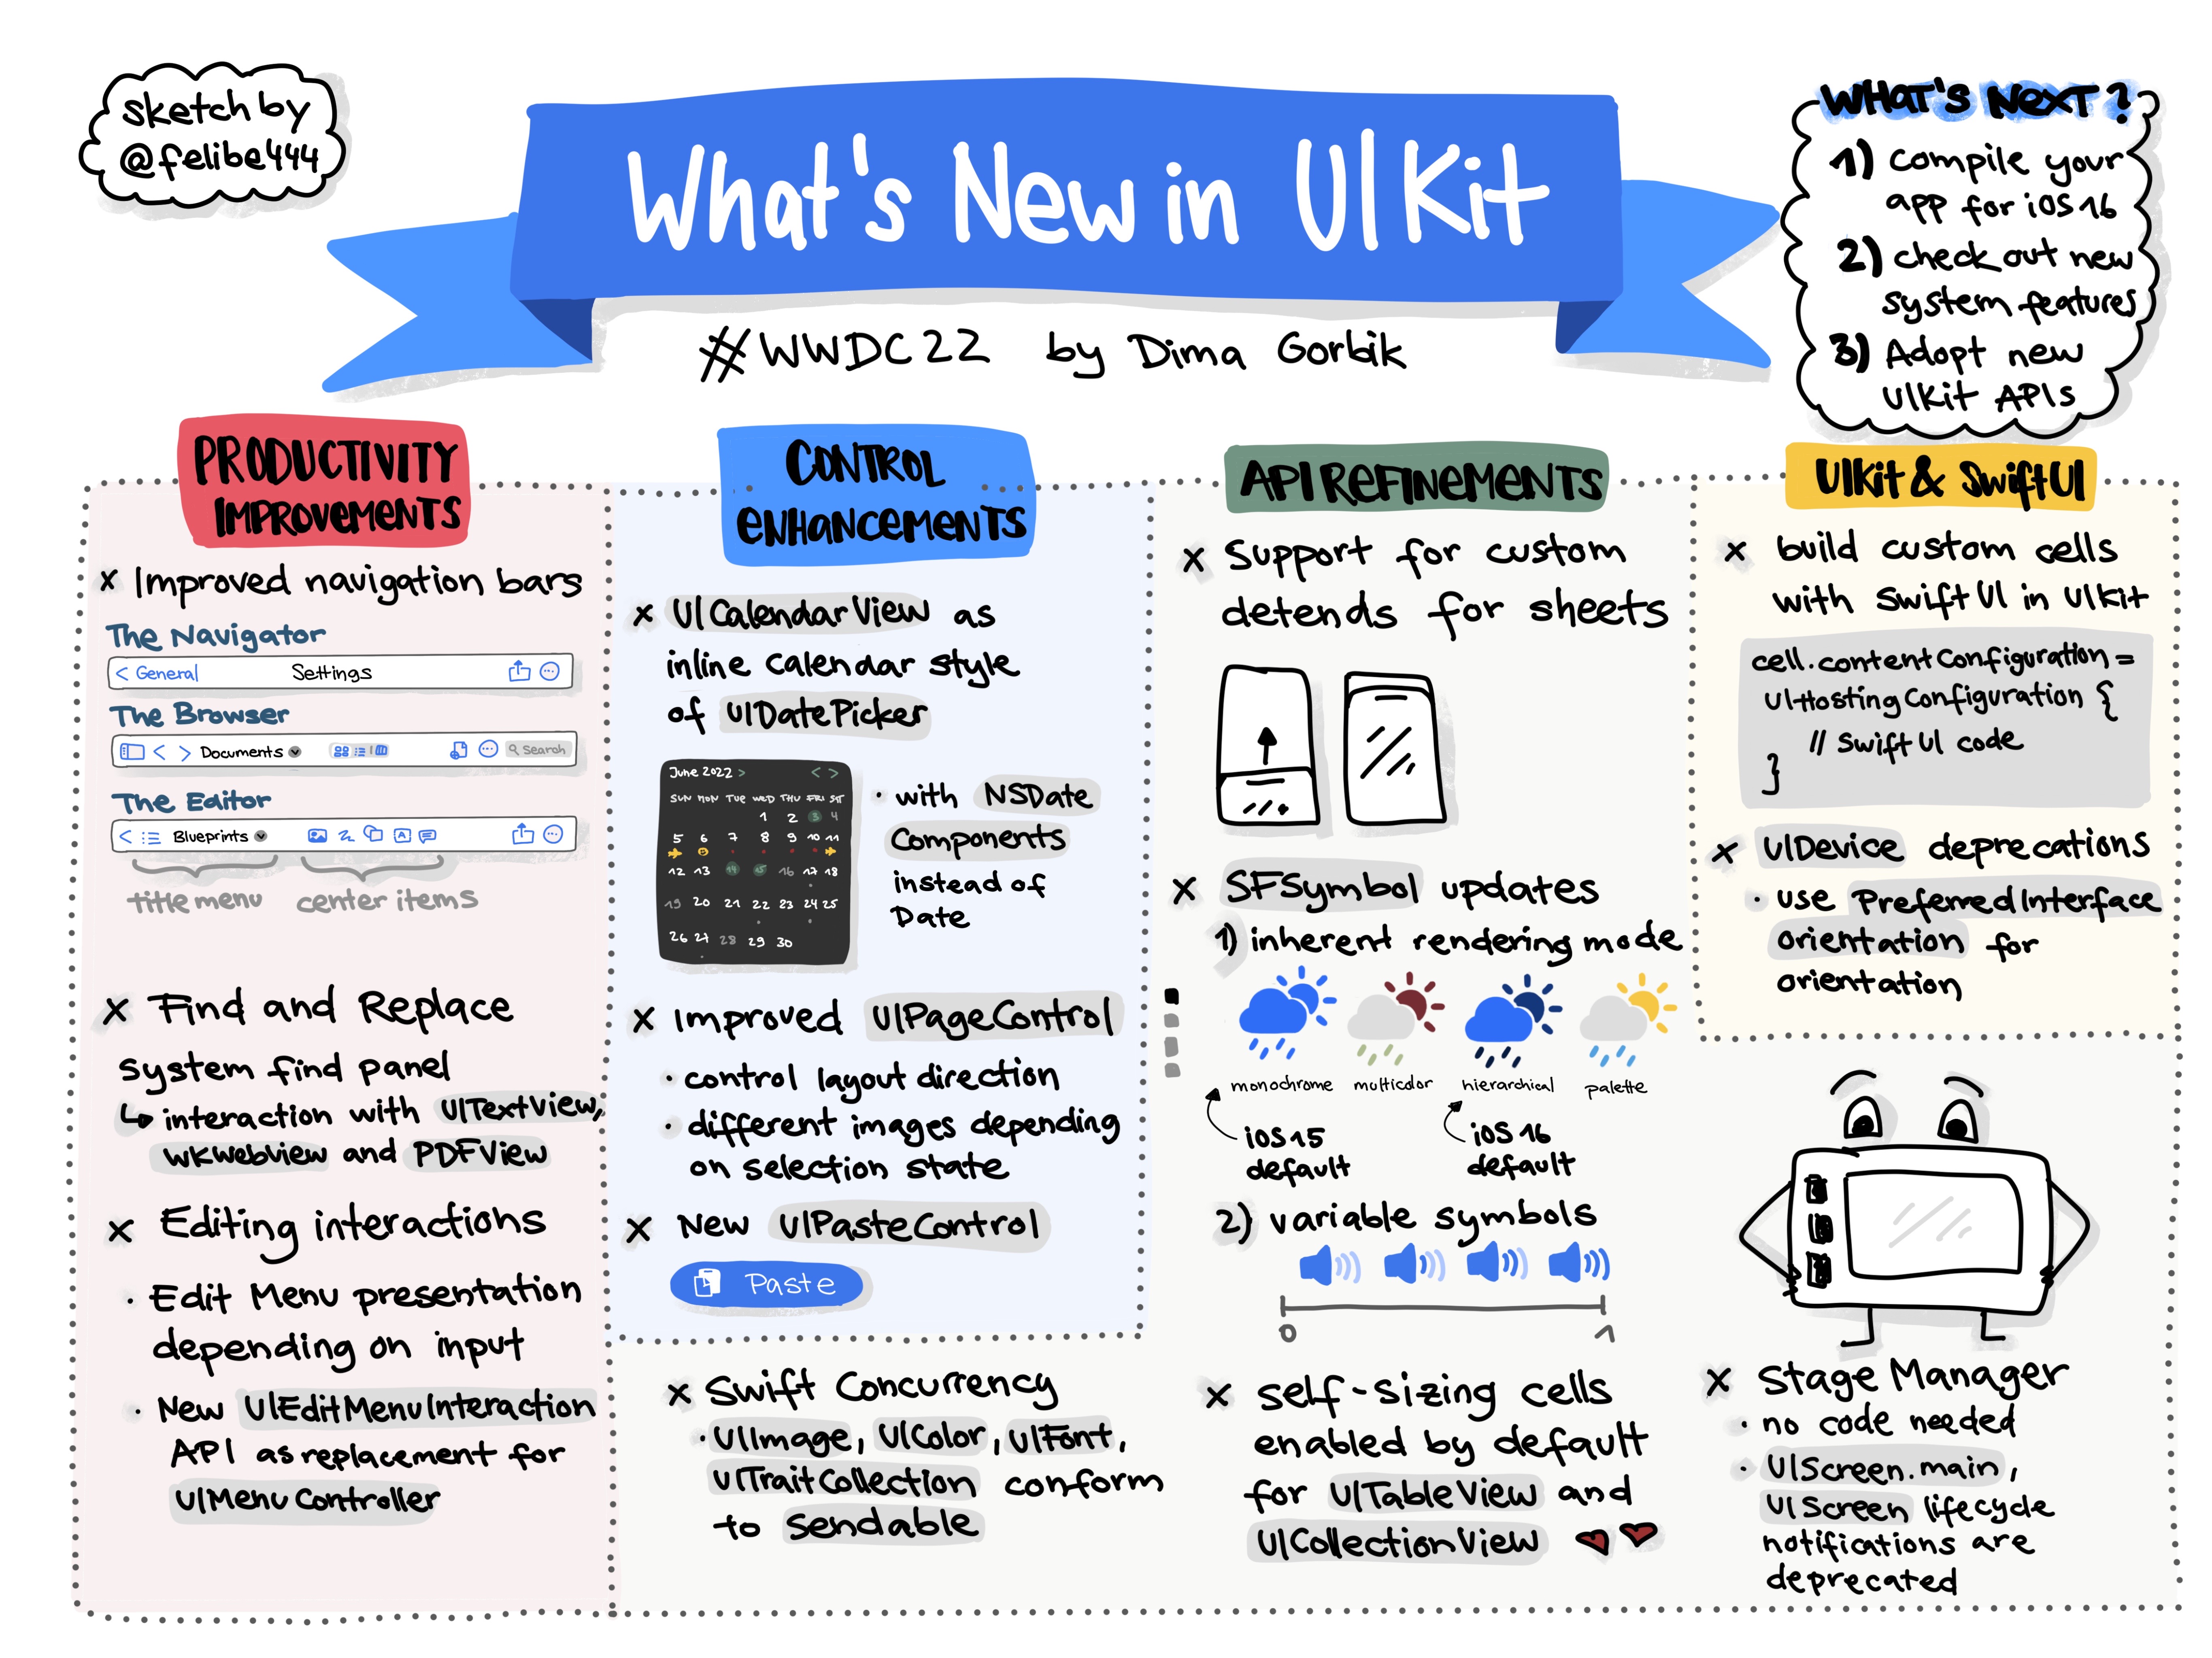 Sketchnote of whatâ€™s new in UIKit with productivity improvements, control enhancements, API refinements and news about UIKit and SwiftUI